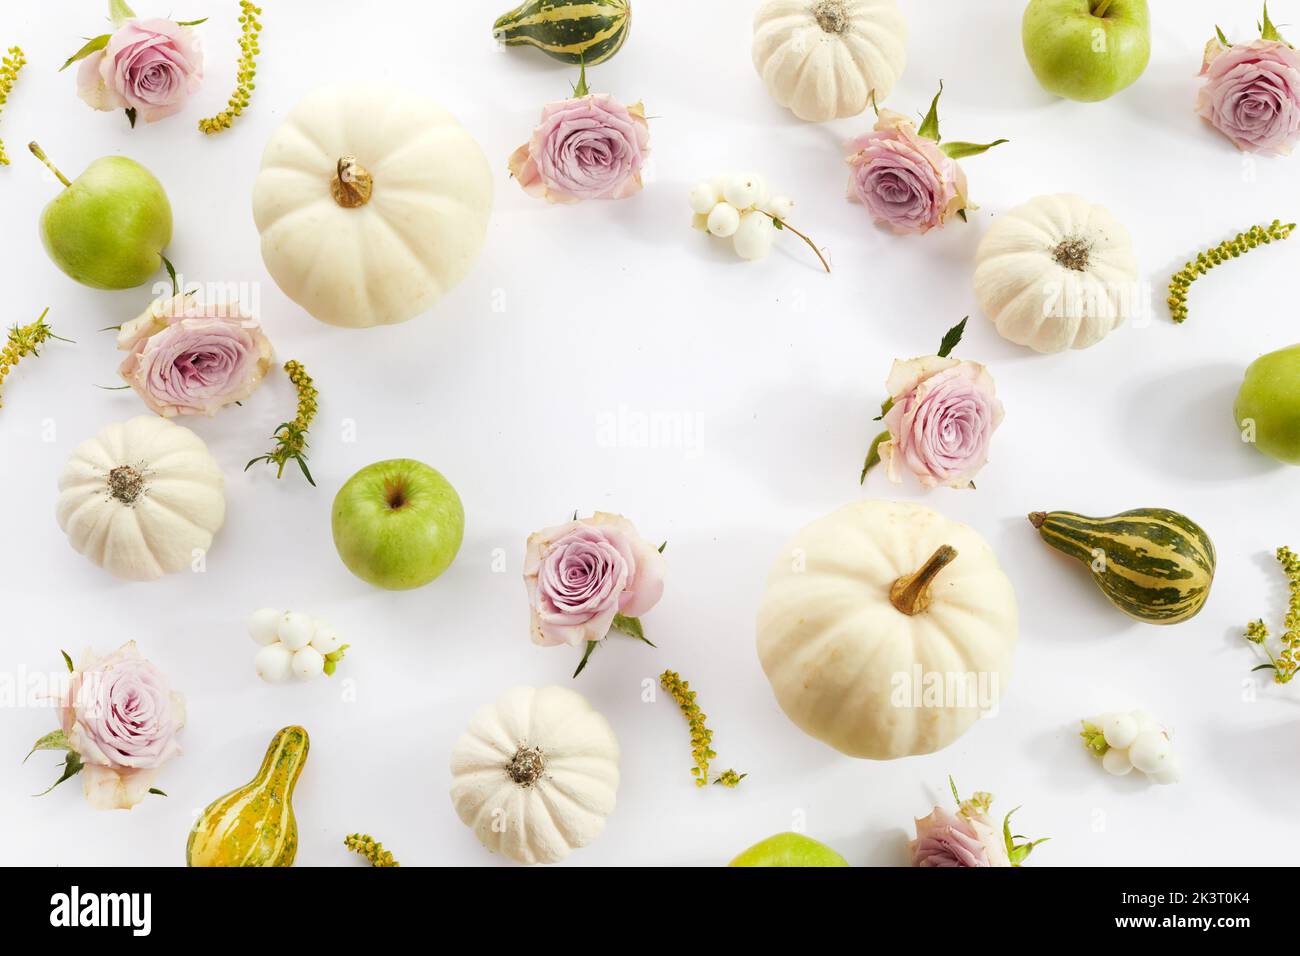 Autumn composition. Pumpkins, flowers, apples on white background. Autumn, fall, thanksgiving day concept. Flat lay. Stock Photo